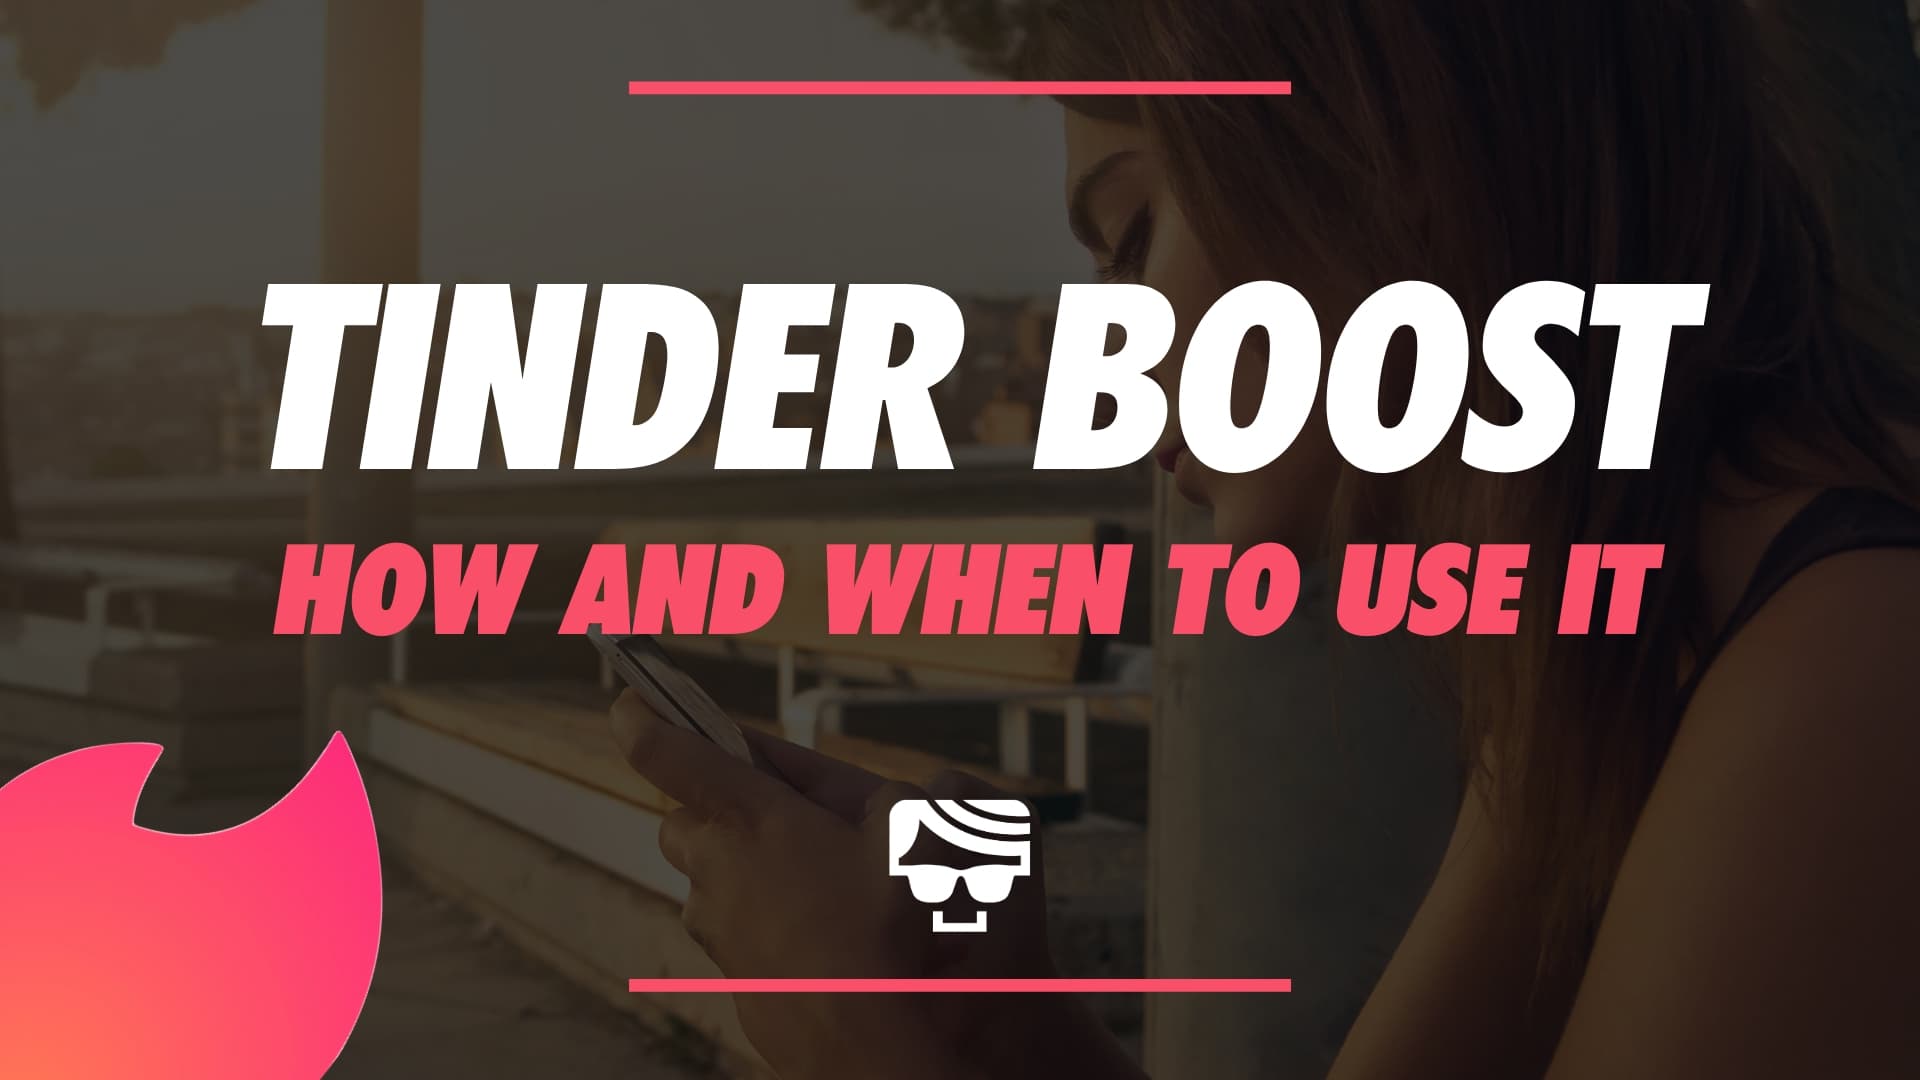 Tinder Boost How and When To Use It